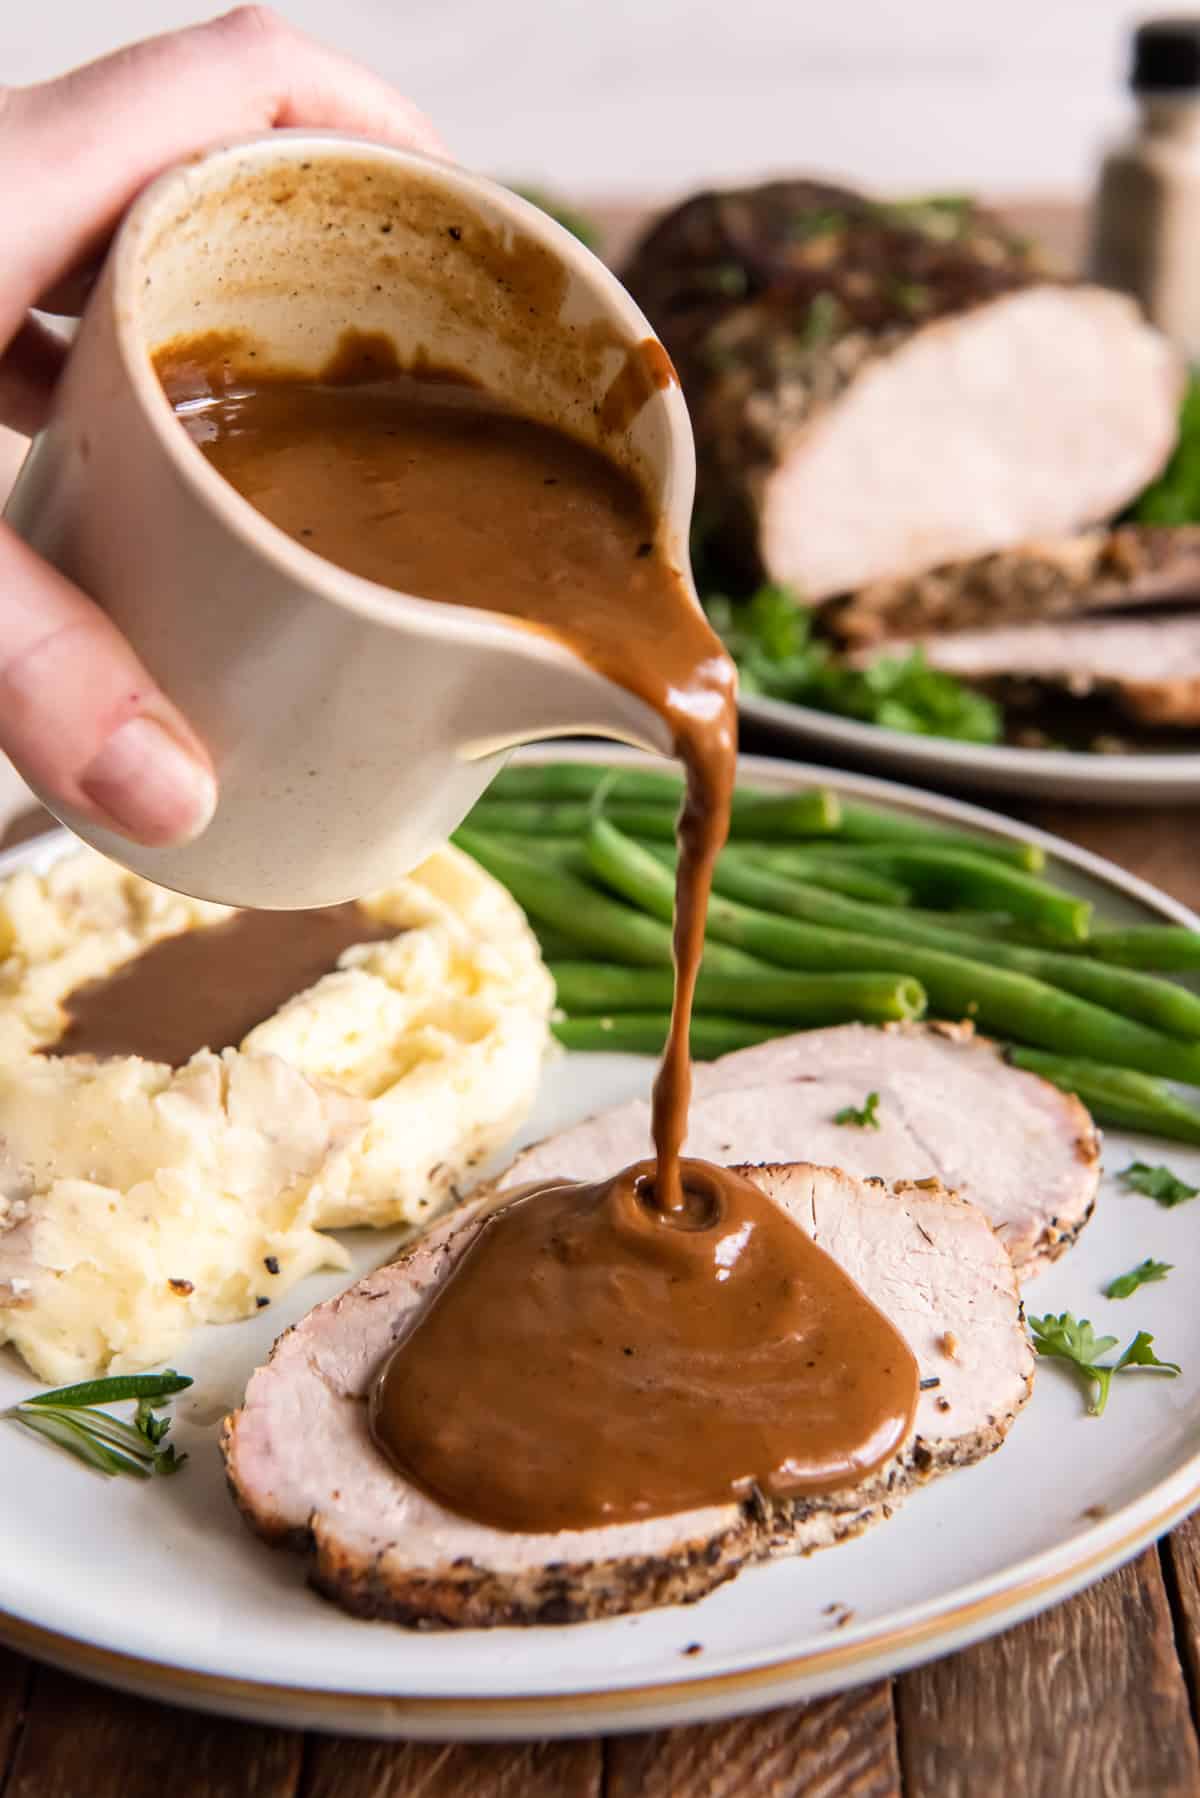 Gravy pouring on sliced pork loin on a plate with mashed potatoes.